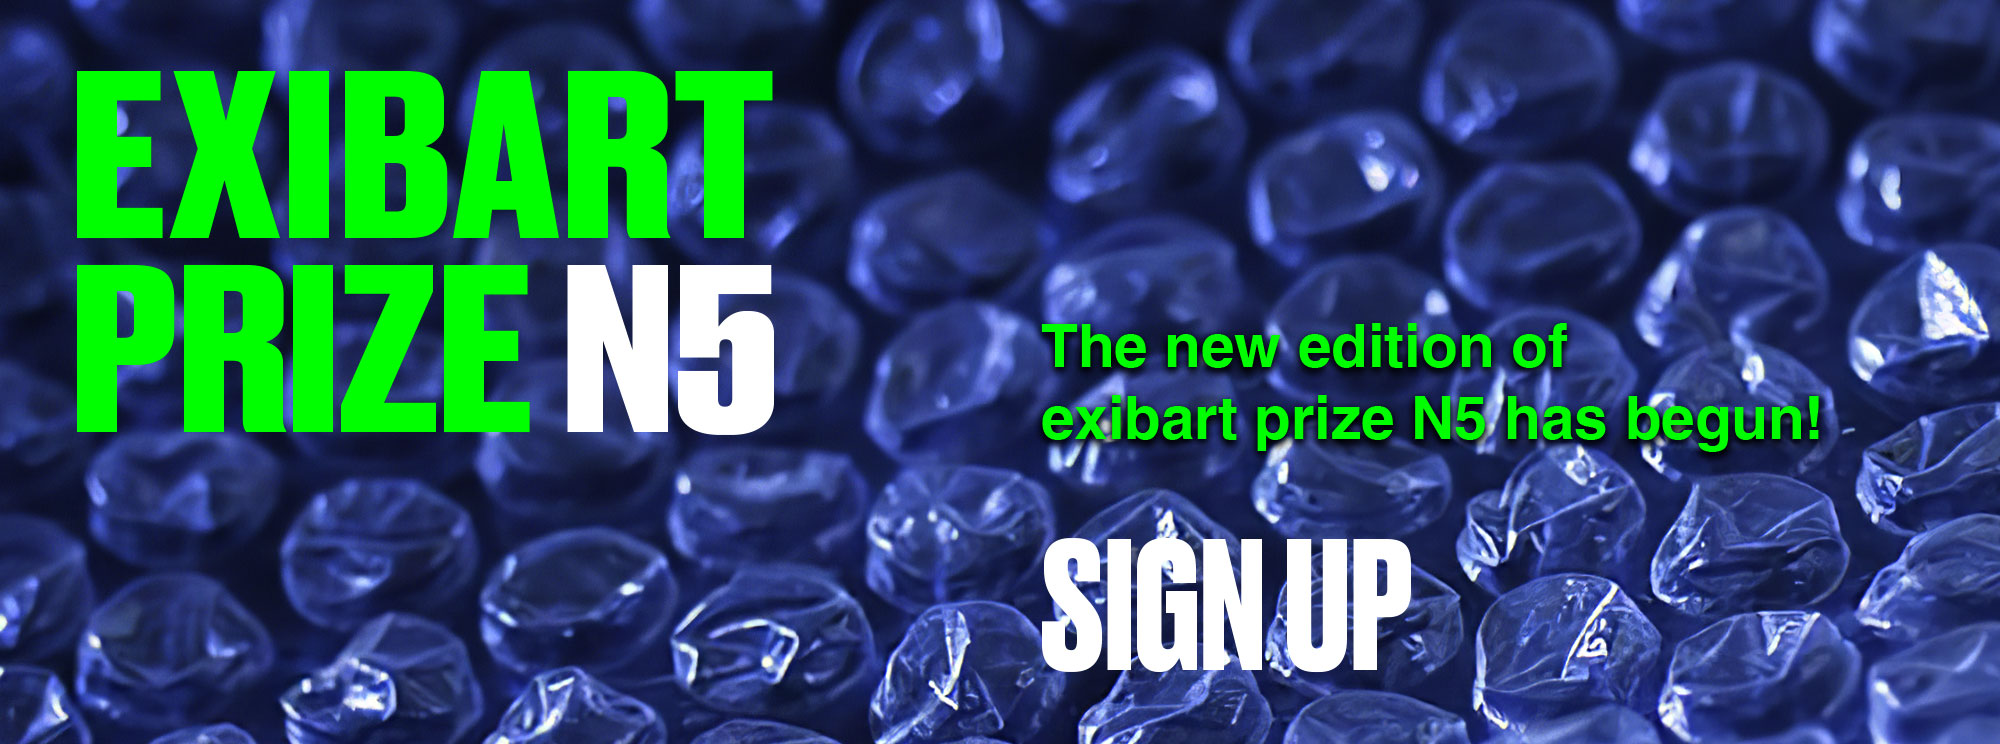 Sign up for the exibart prize N5